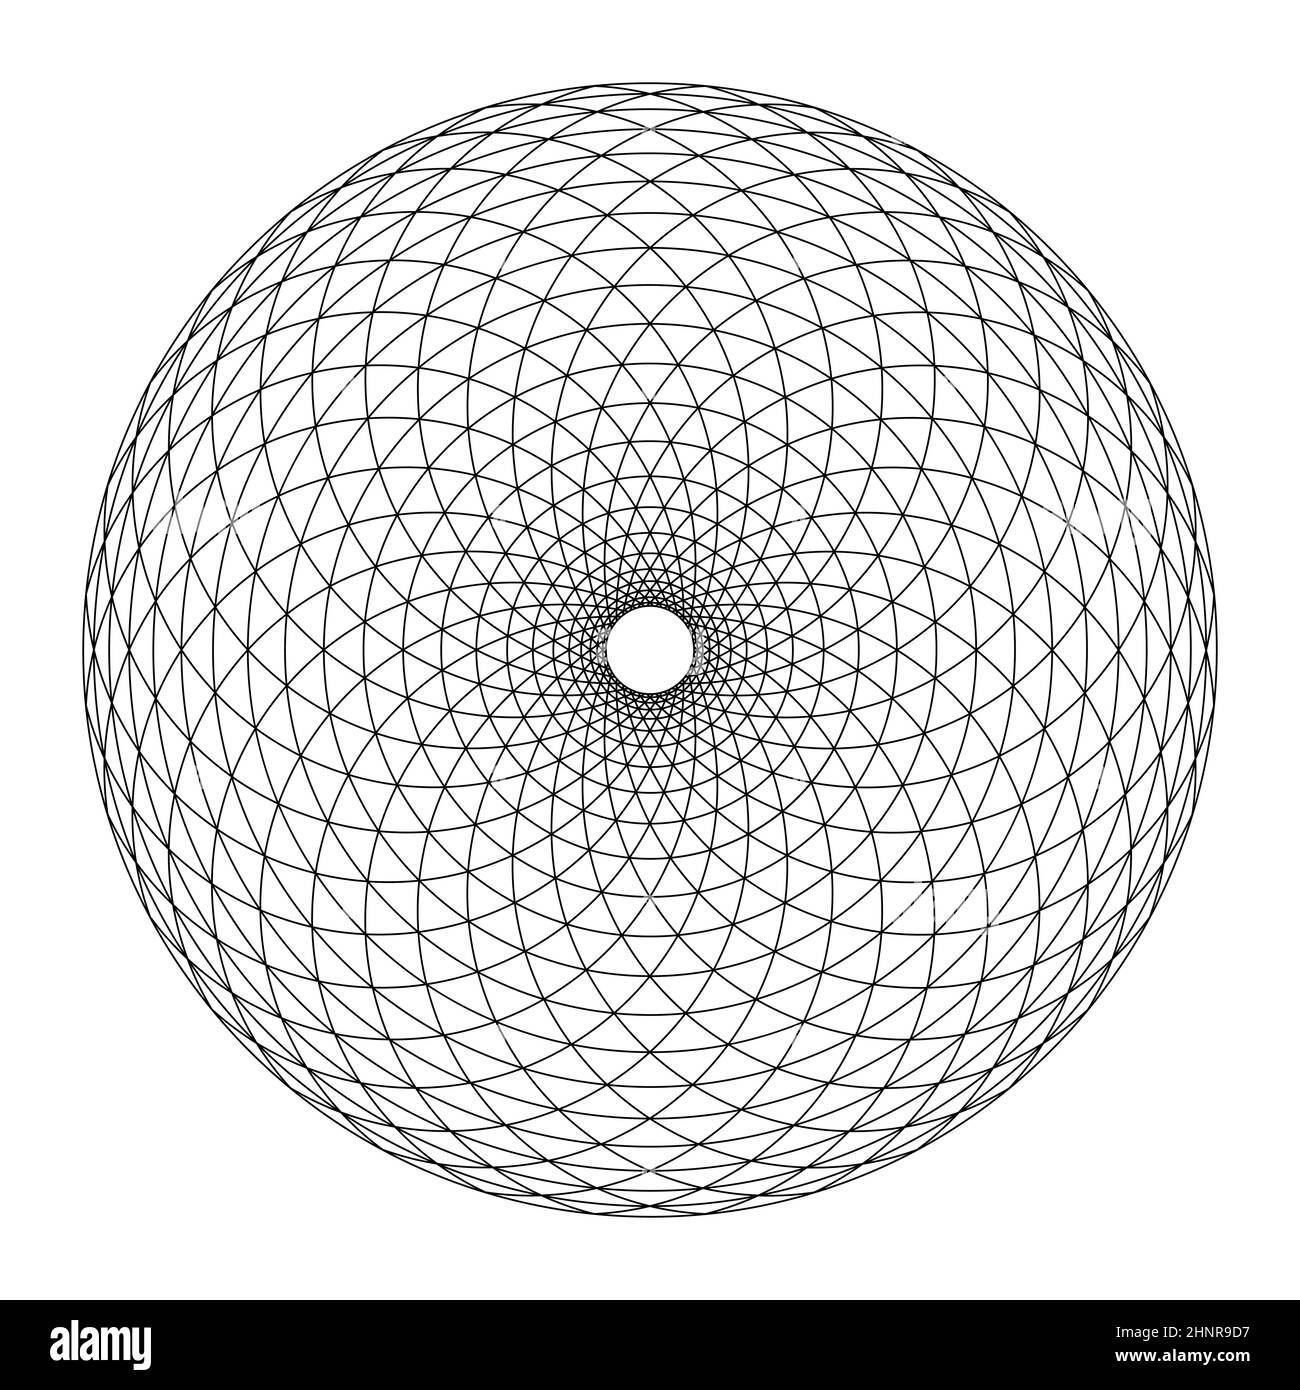 Circle with triangle Fibonacci pattern. Circular area, formed by arcs, arranged in spiral form, crossed by circles, creating bend triangles. Stock Photo